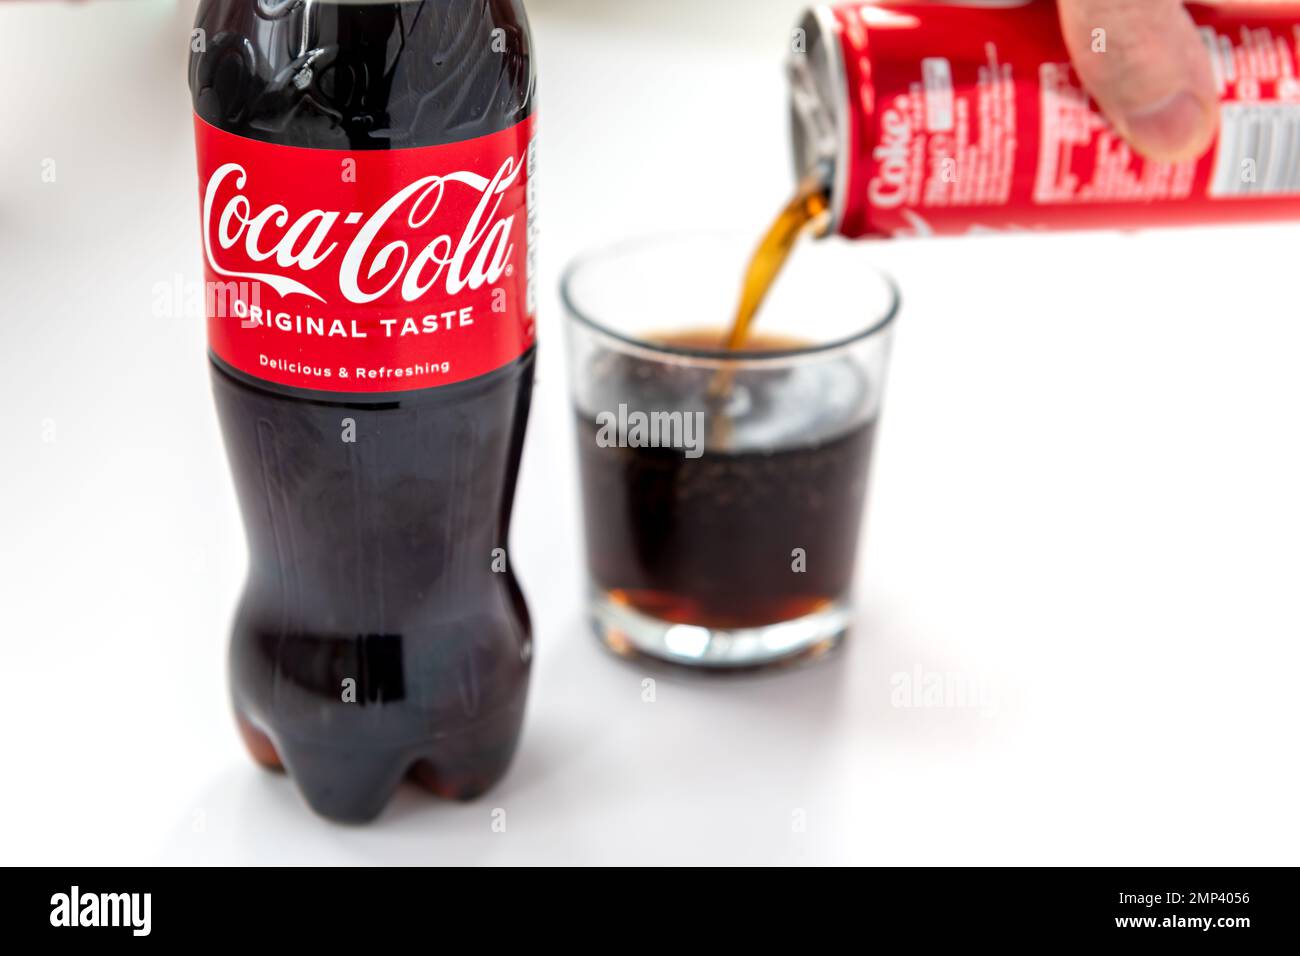 London. UK- 01.29.2023. A bottle of Coca Cola original taste isolated in white with a person pouring a can of the drink into a glass. Stock Photo